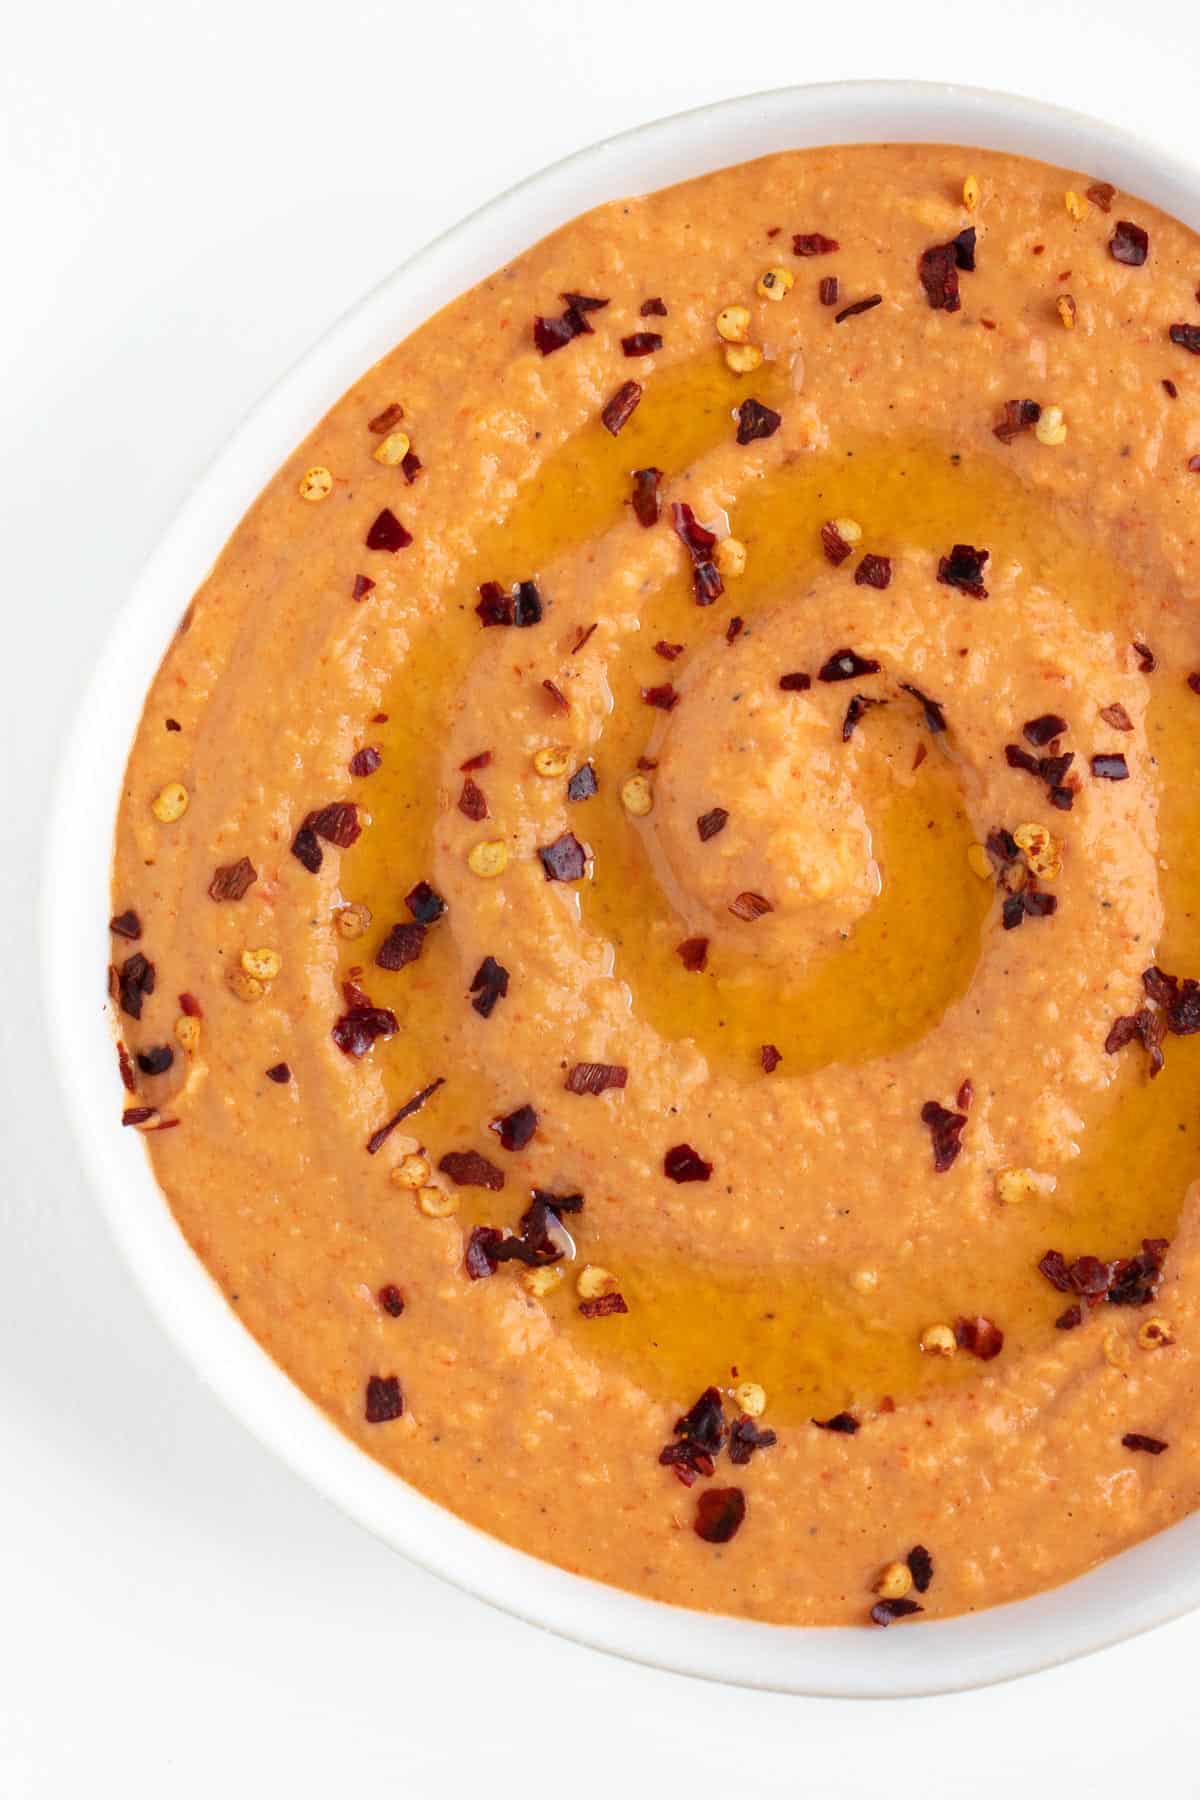 red pepper hummus topped with crushed red pepper flakes